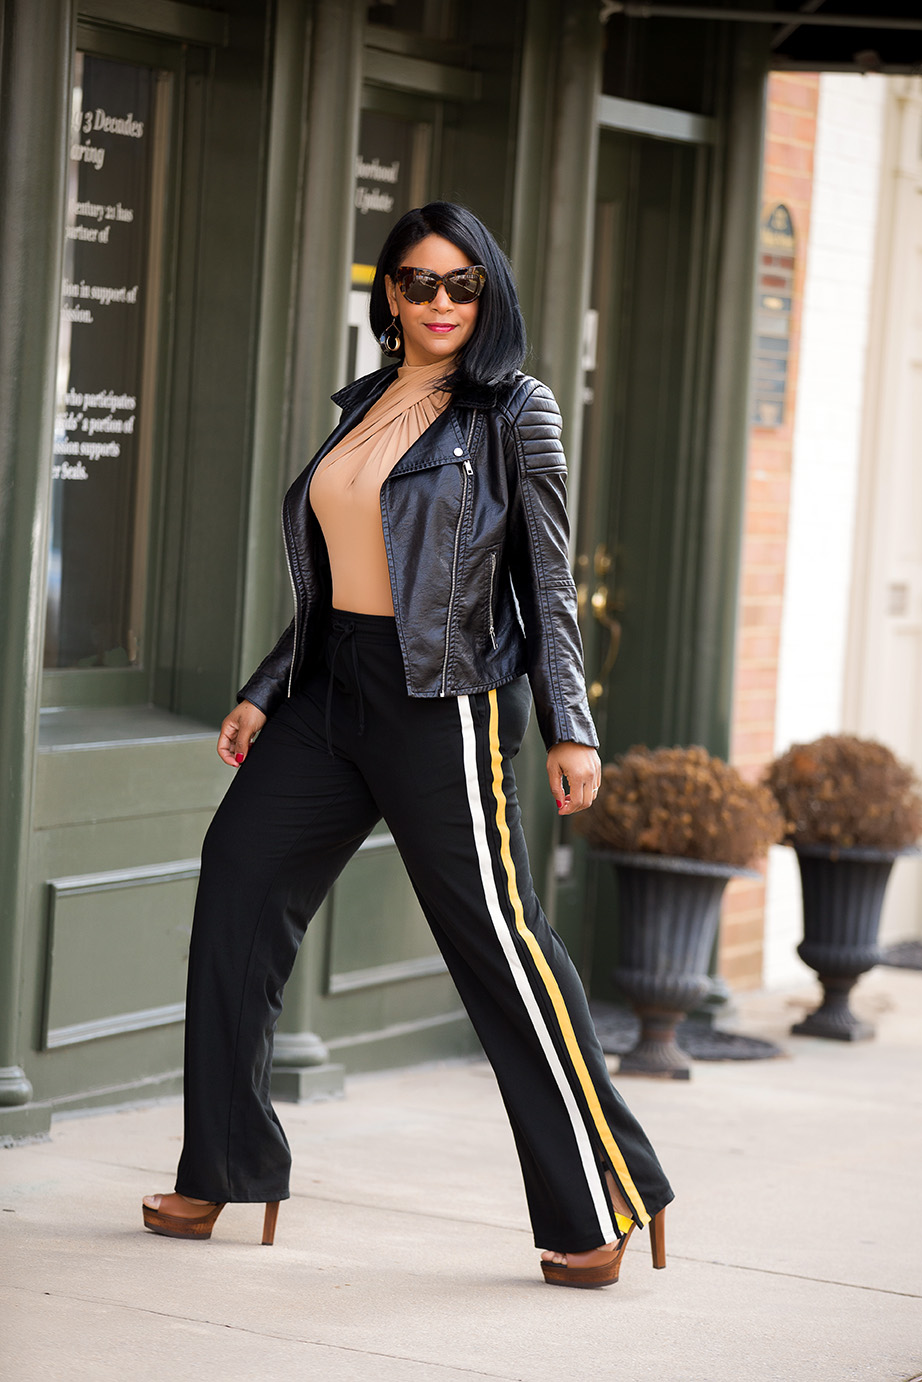 What’s Haute, What’s Haute Closet, A Good Sport - What I’m Wearing: H&M Biker Jacket, H&M Draped Bodysuit, Who What Wear Women’s Track Pant with Side Stripe, Jimmy Choo Samos Leather And Wood Platform Sandals, athleisure, athletic style, being a good sport, inspiration